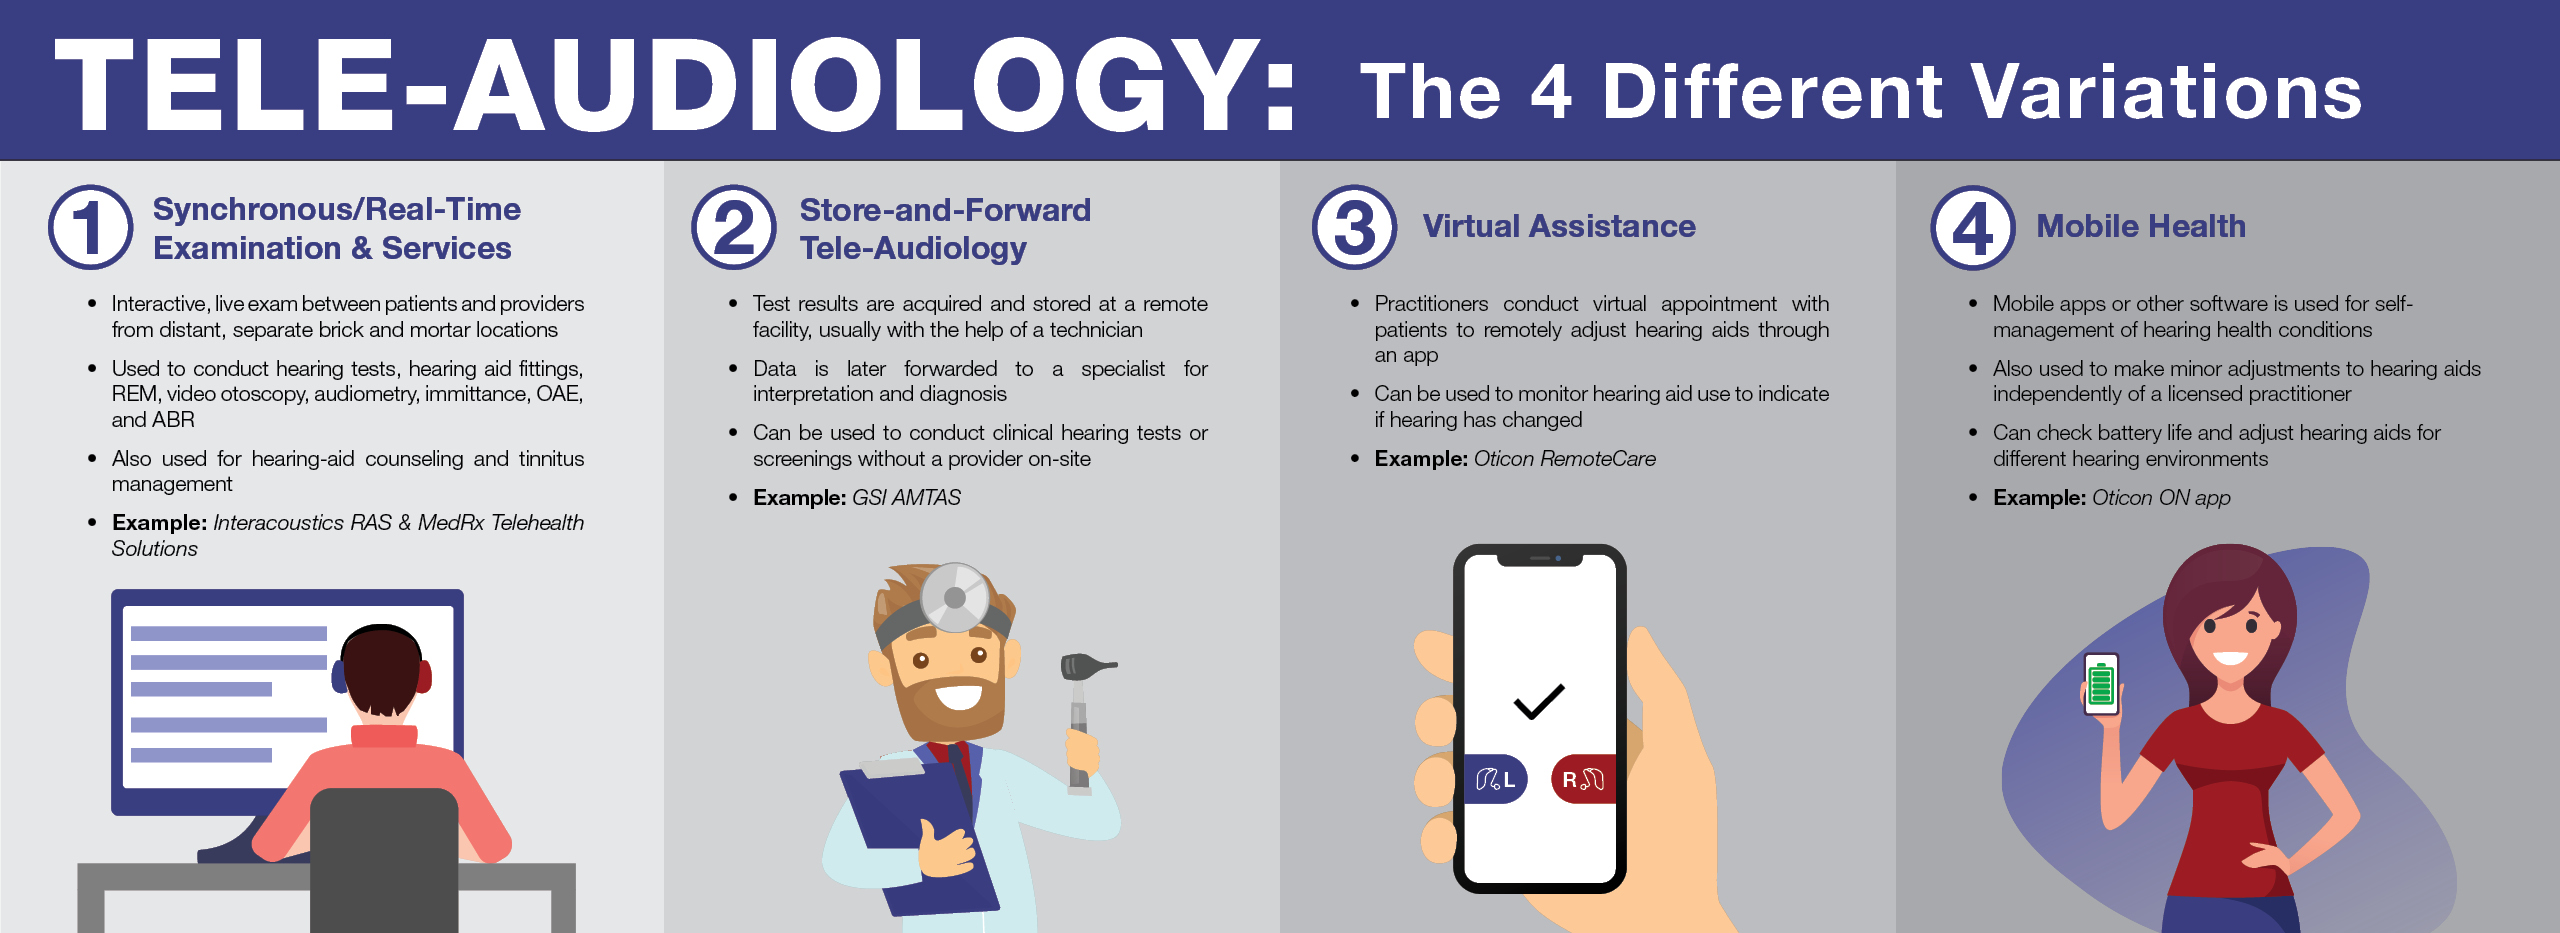 teleaudiology_infographic3